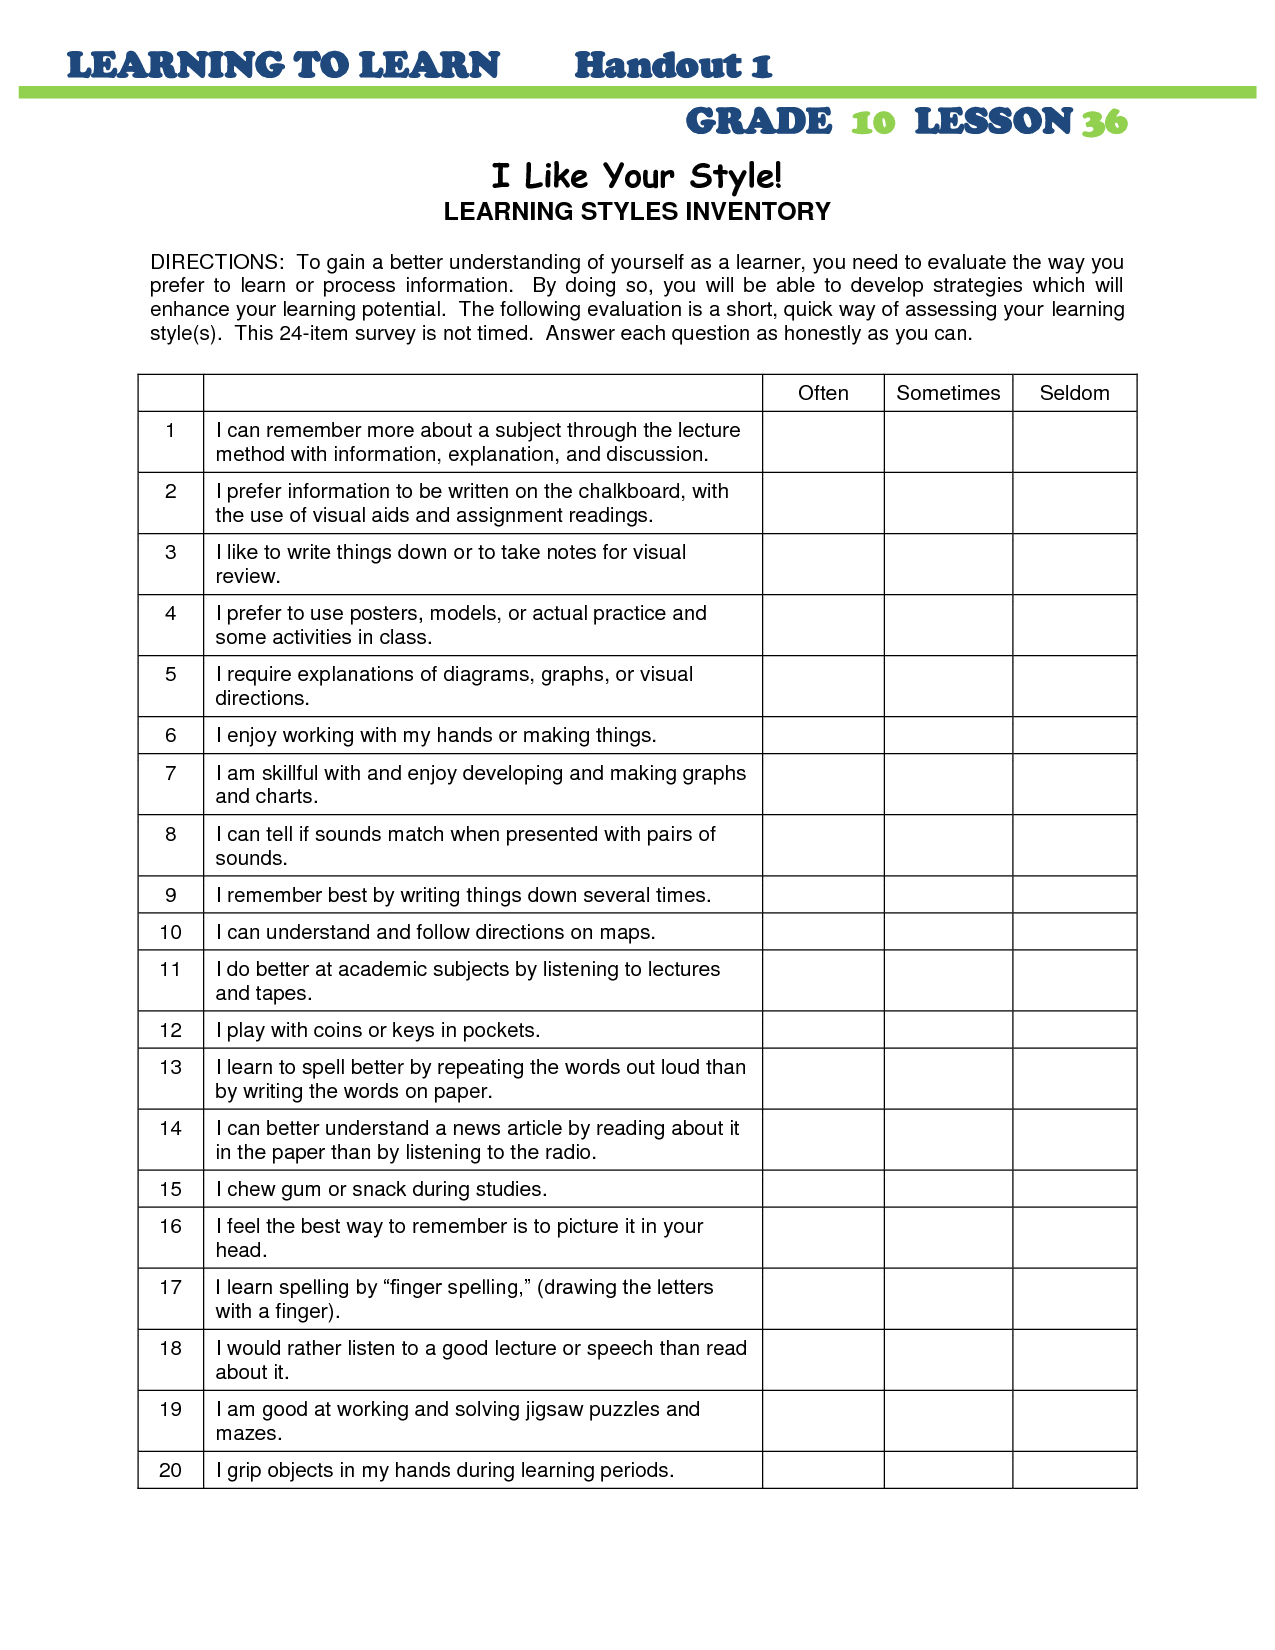 Free Learning Style Assessment Printable